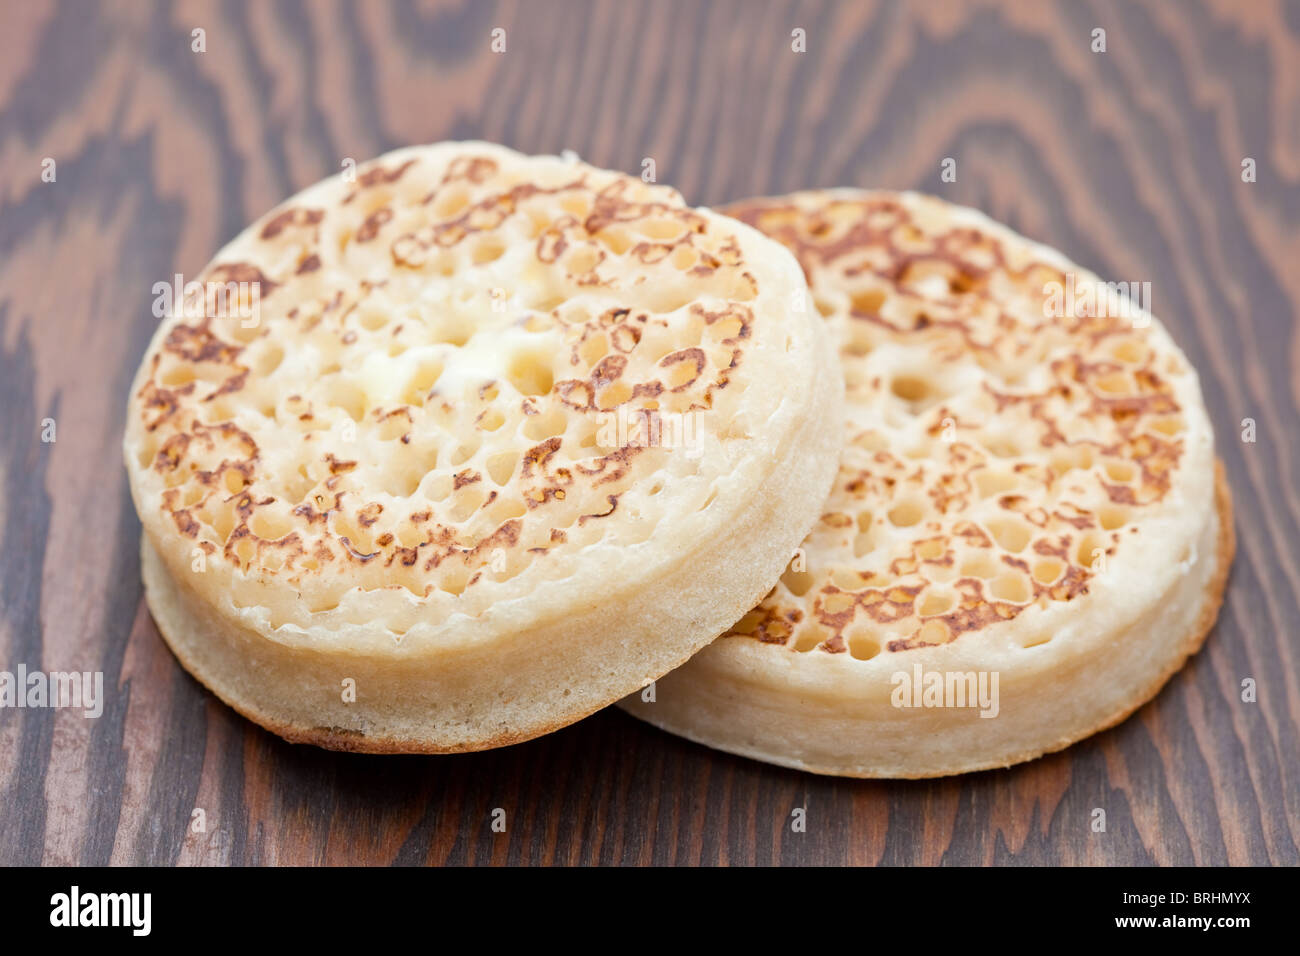 Freshly toasted crumpet on a wooden tray Stock Photo